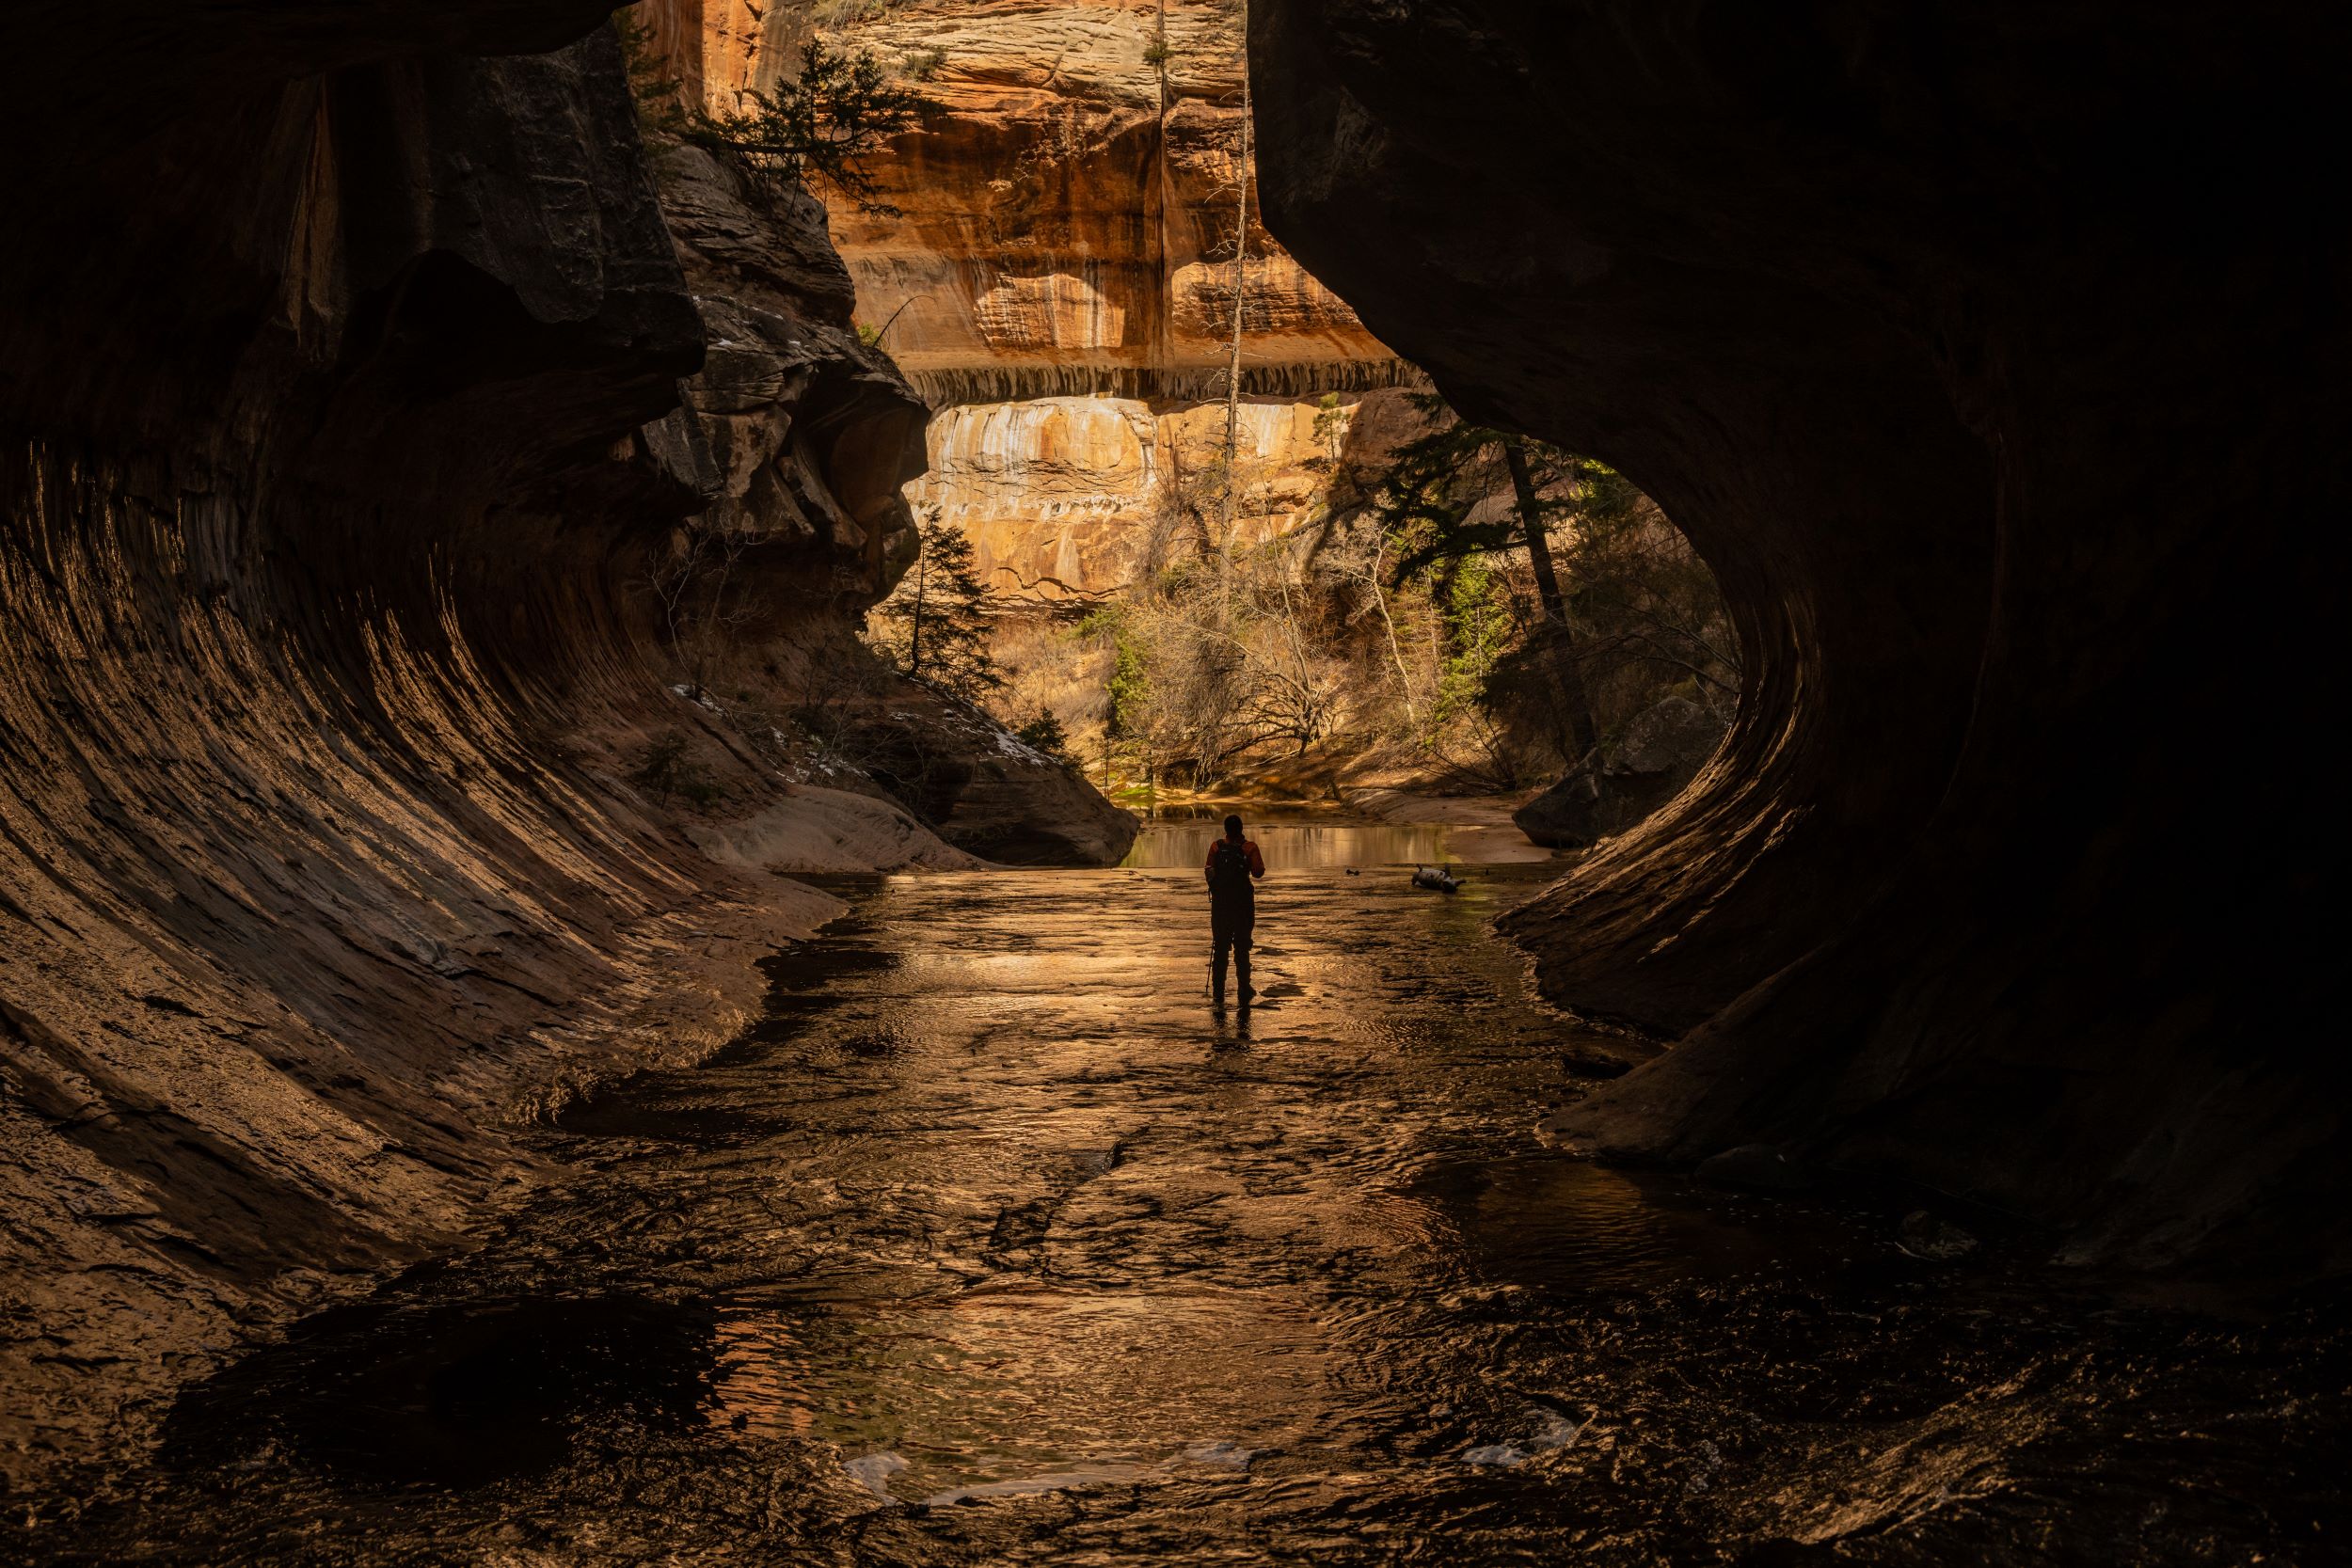 A hiker in Zion's Subway.